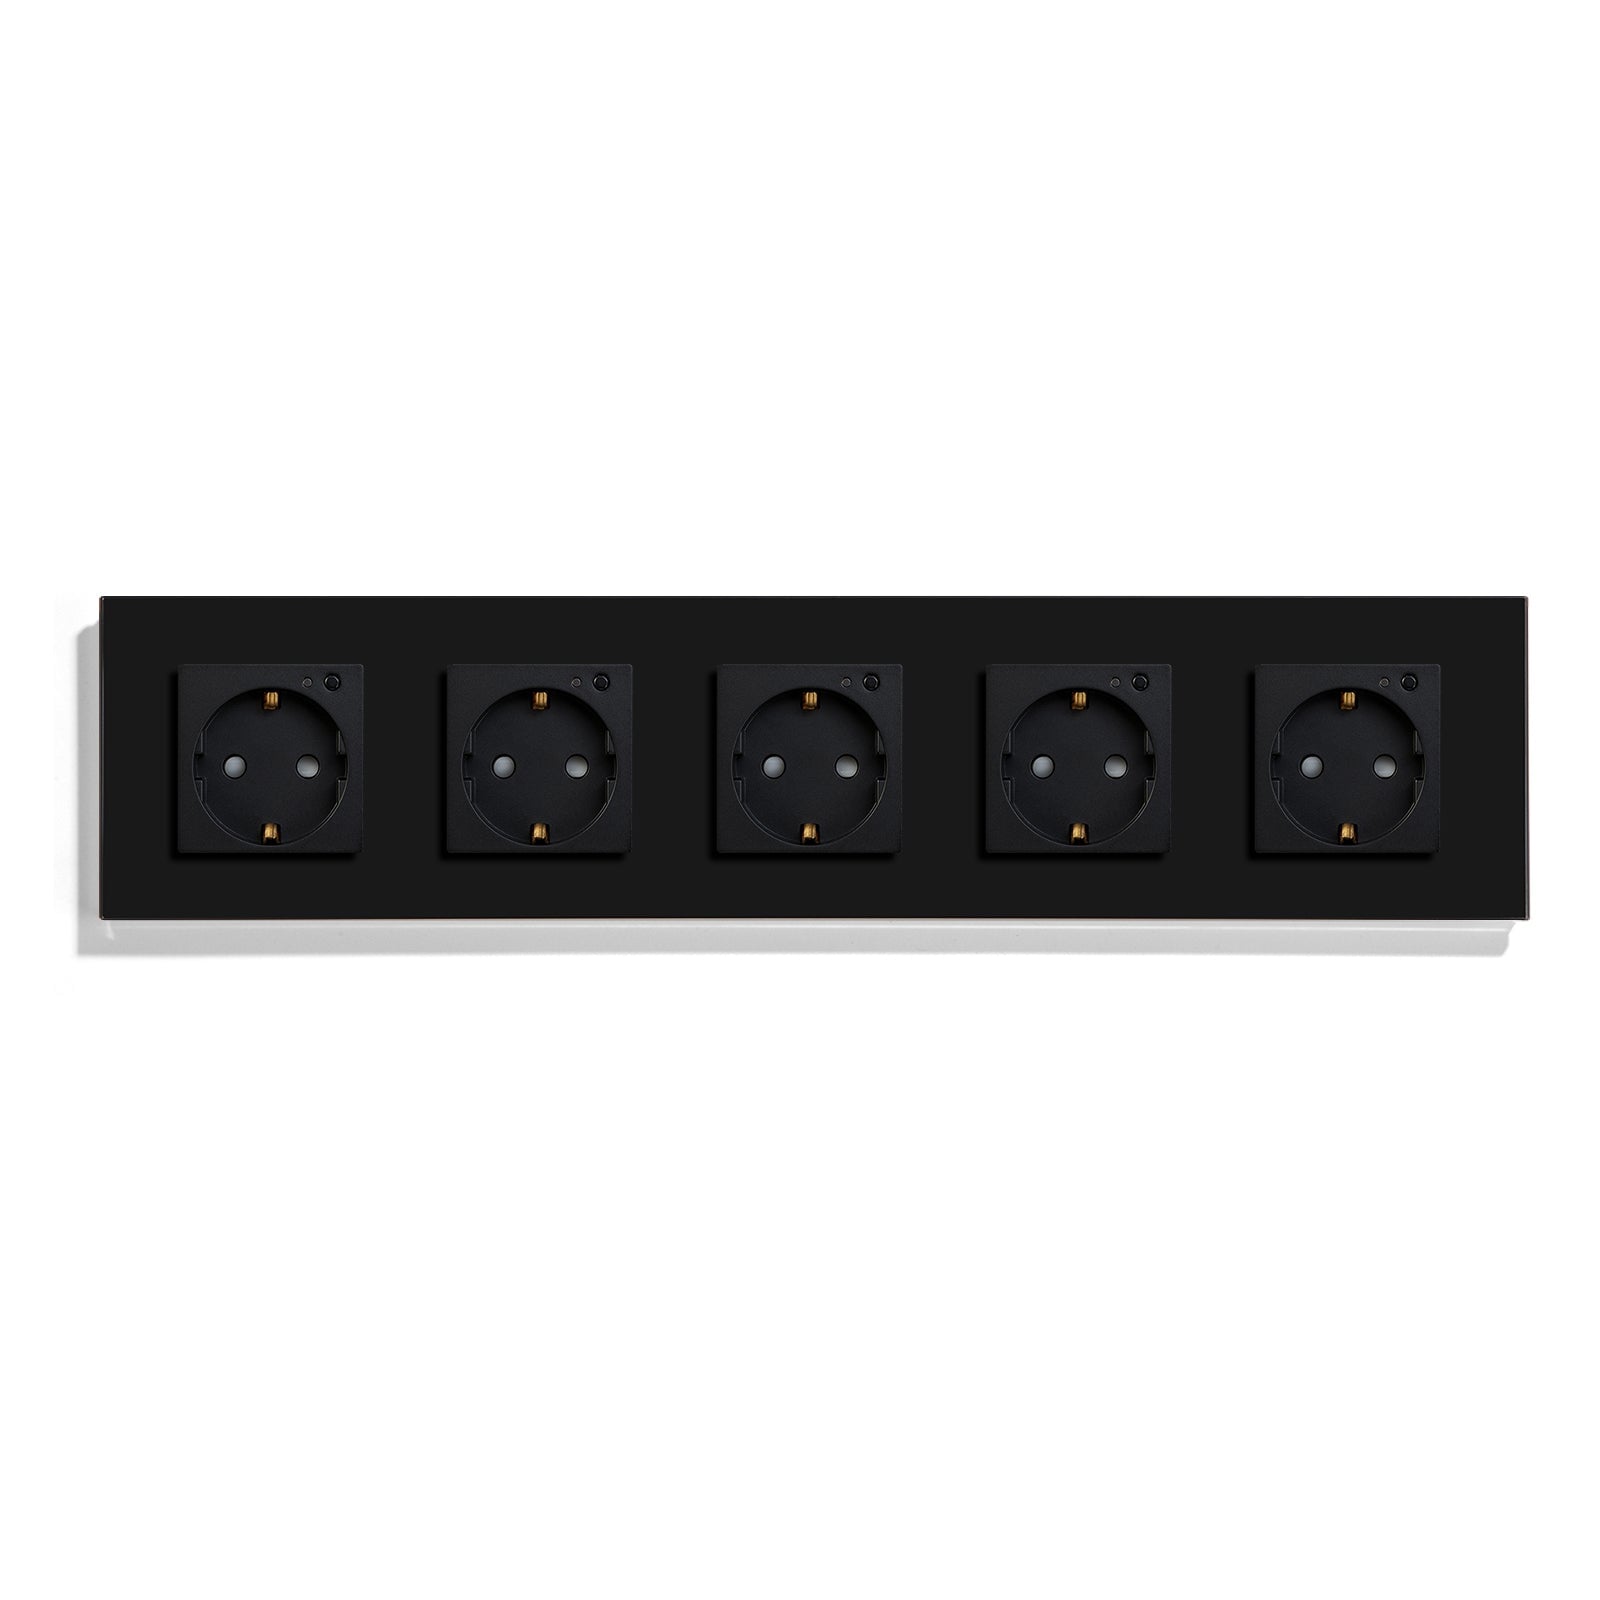 Bseed Wifi EU Standard Socket Wall Sockets With Energy Monitoring Power Outlets & Sockets Bseedswitch Black Quintuple 